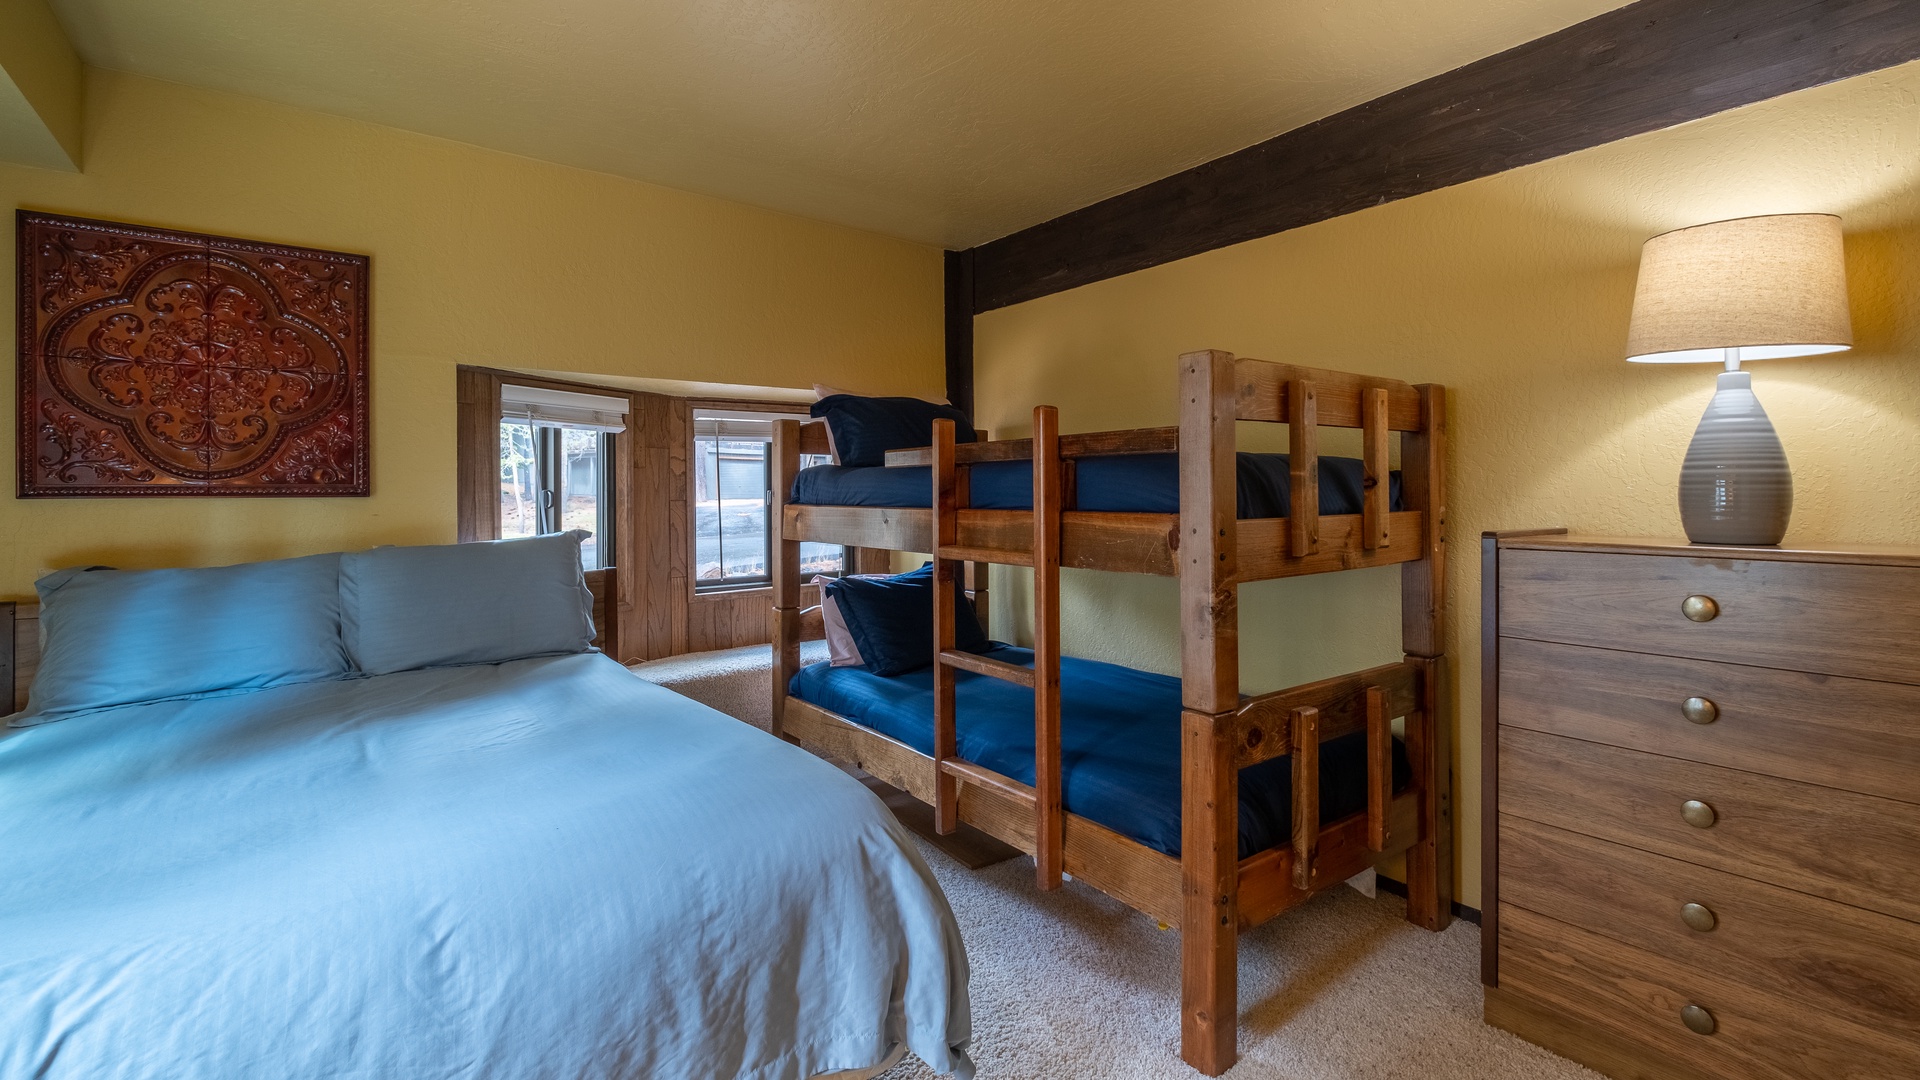 Shared Guest Room with Single Bunk Bed: Tahoe Donner Vacation Lodge